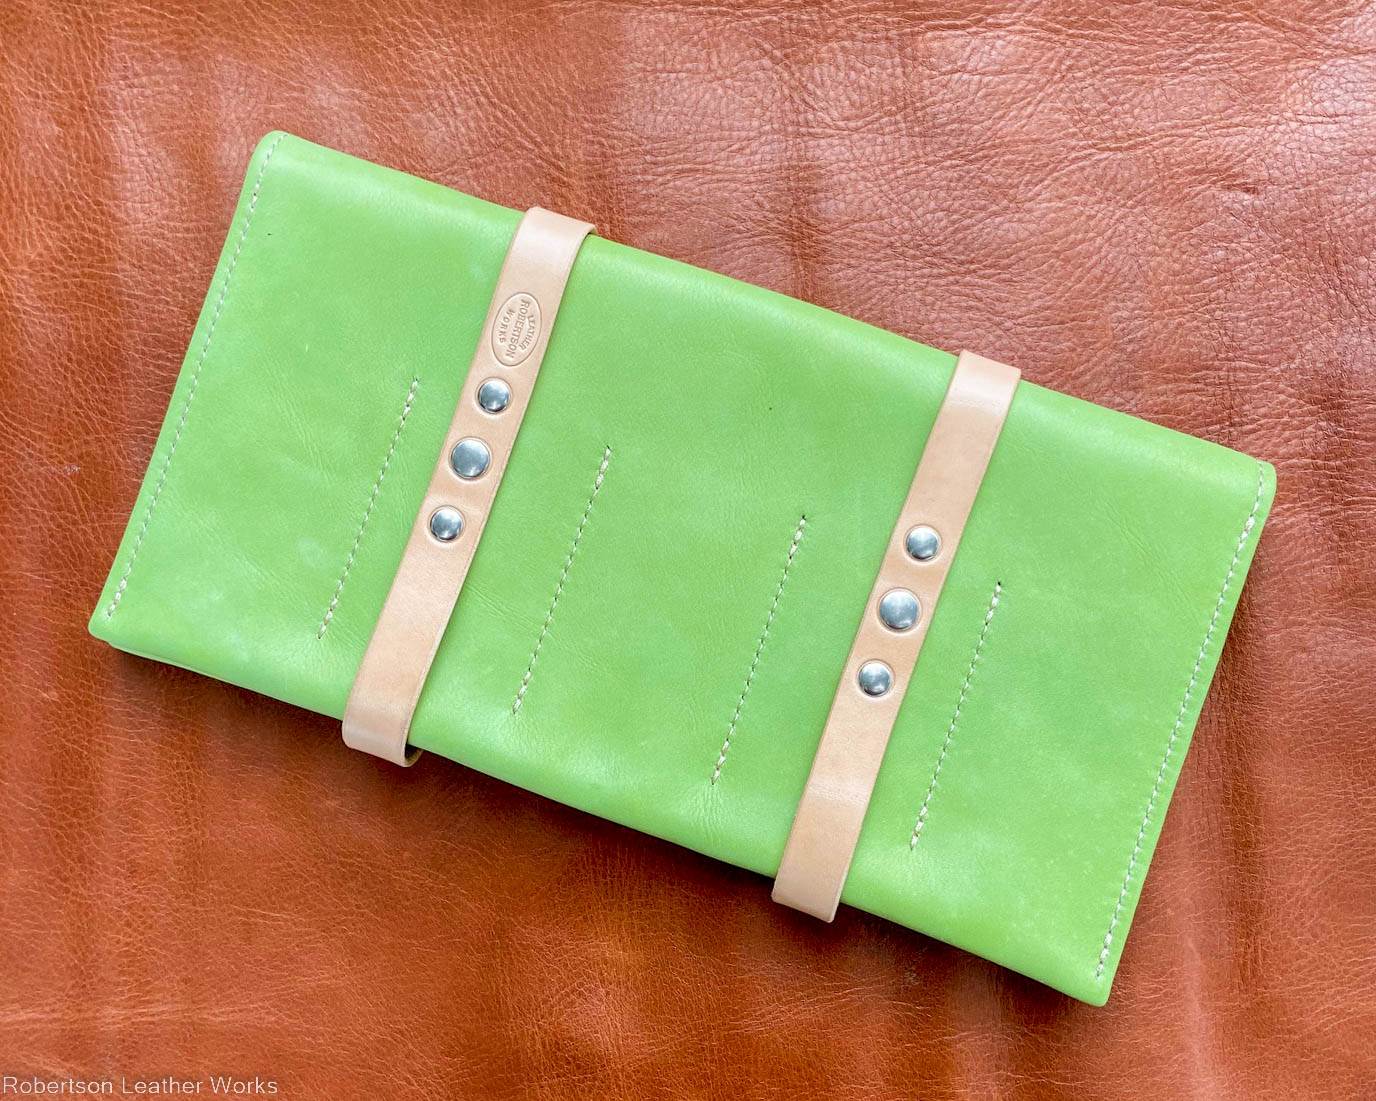 10-Knife Case in Lime Green Leather